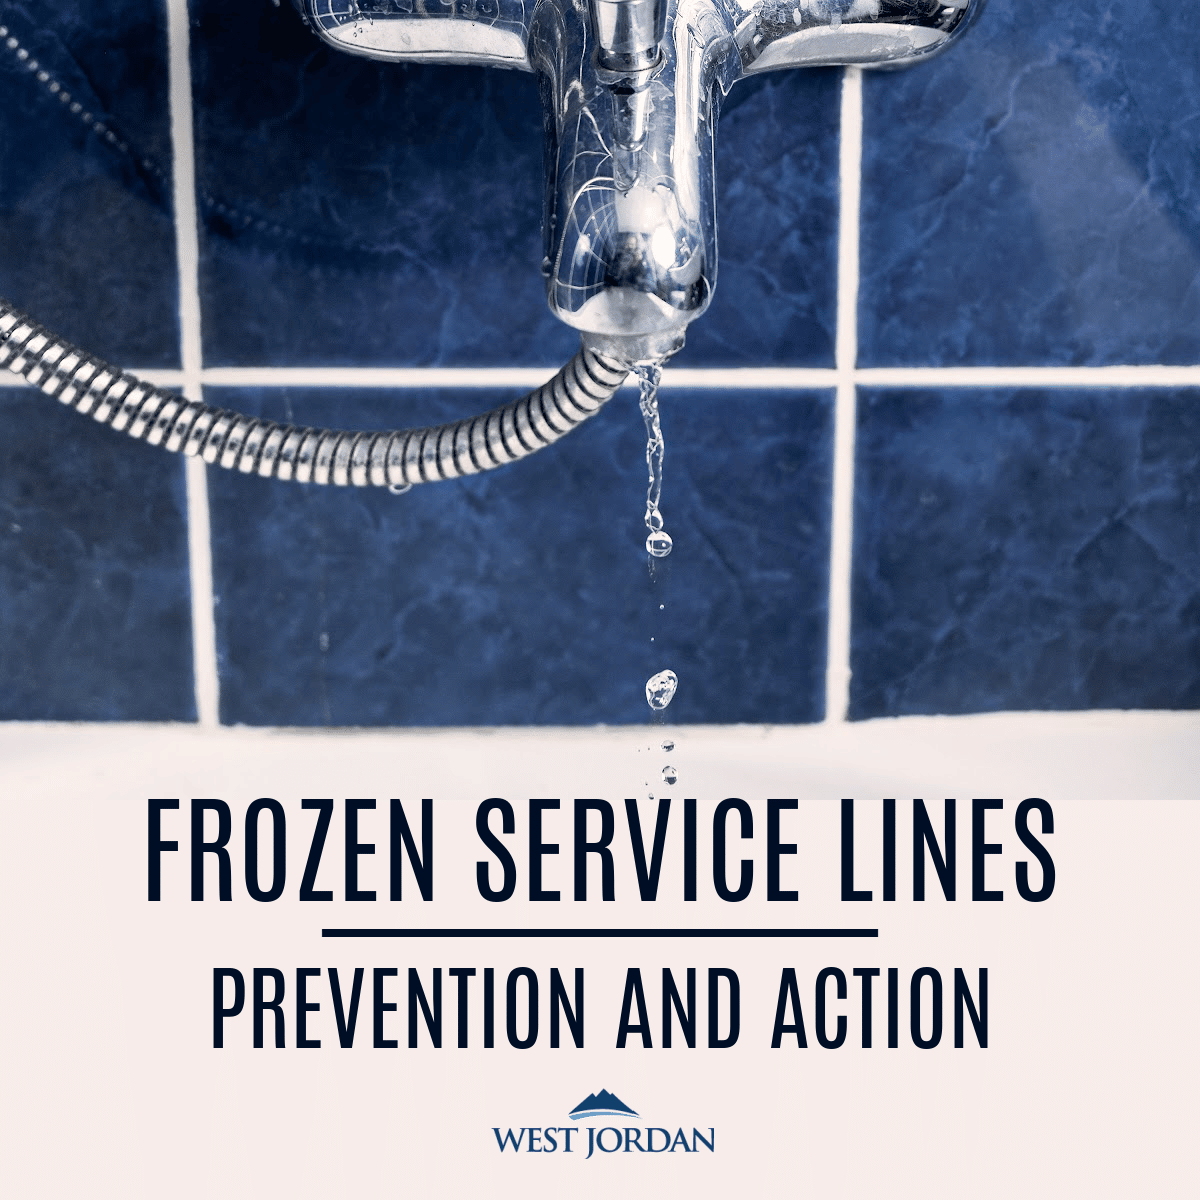 Freezing Temperatures Could Cause Frozen Service Lines